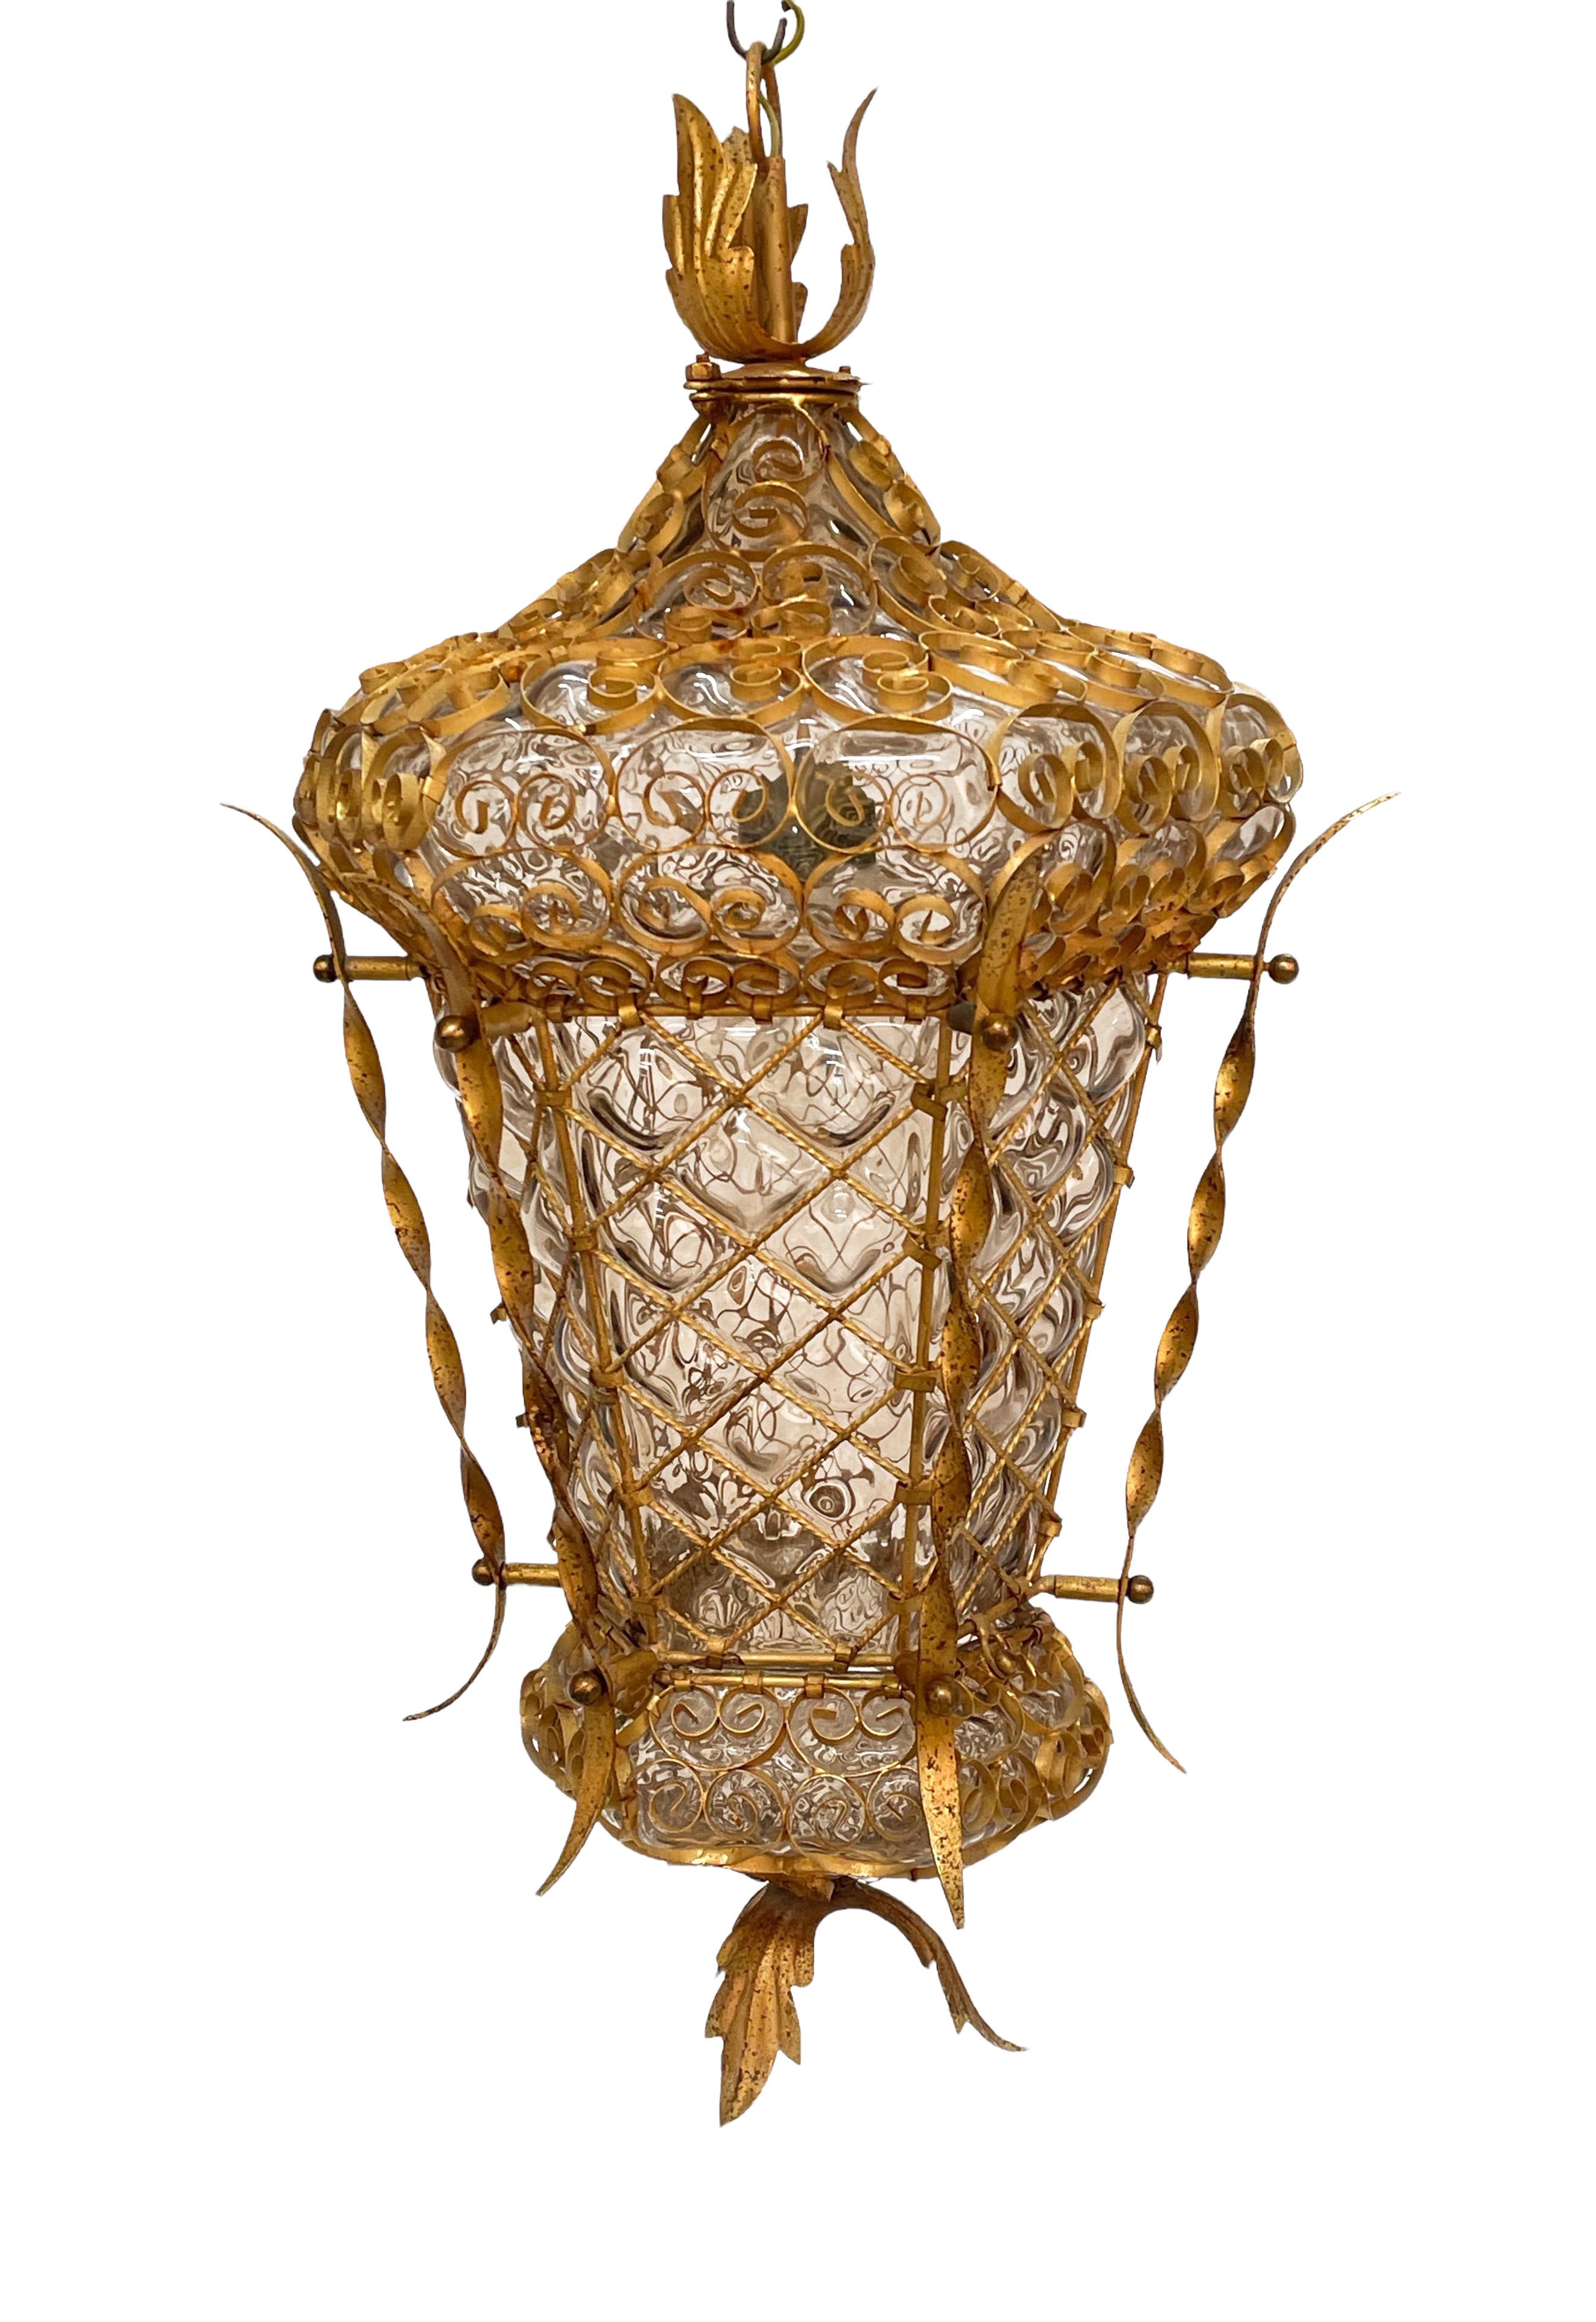 Midcentury Venetian Mouth Blown Glass in Gold Painted Metal Frame Lantern, 1940s For Sale 8